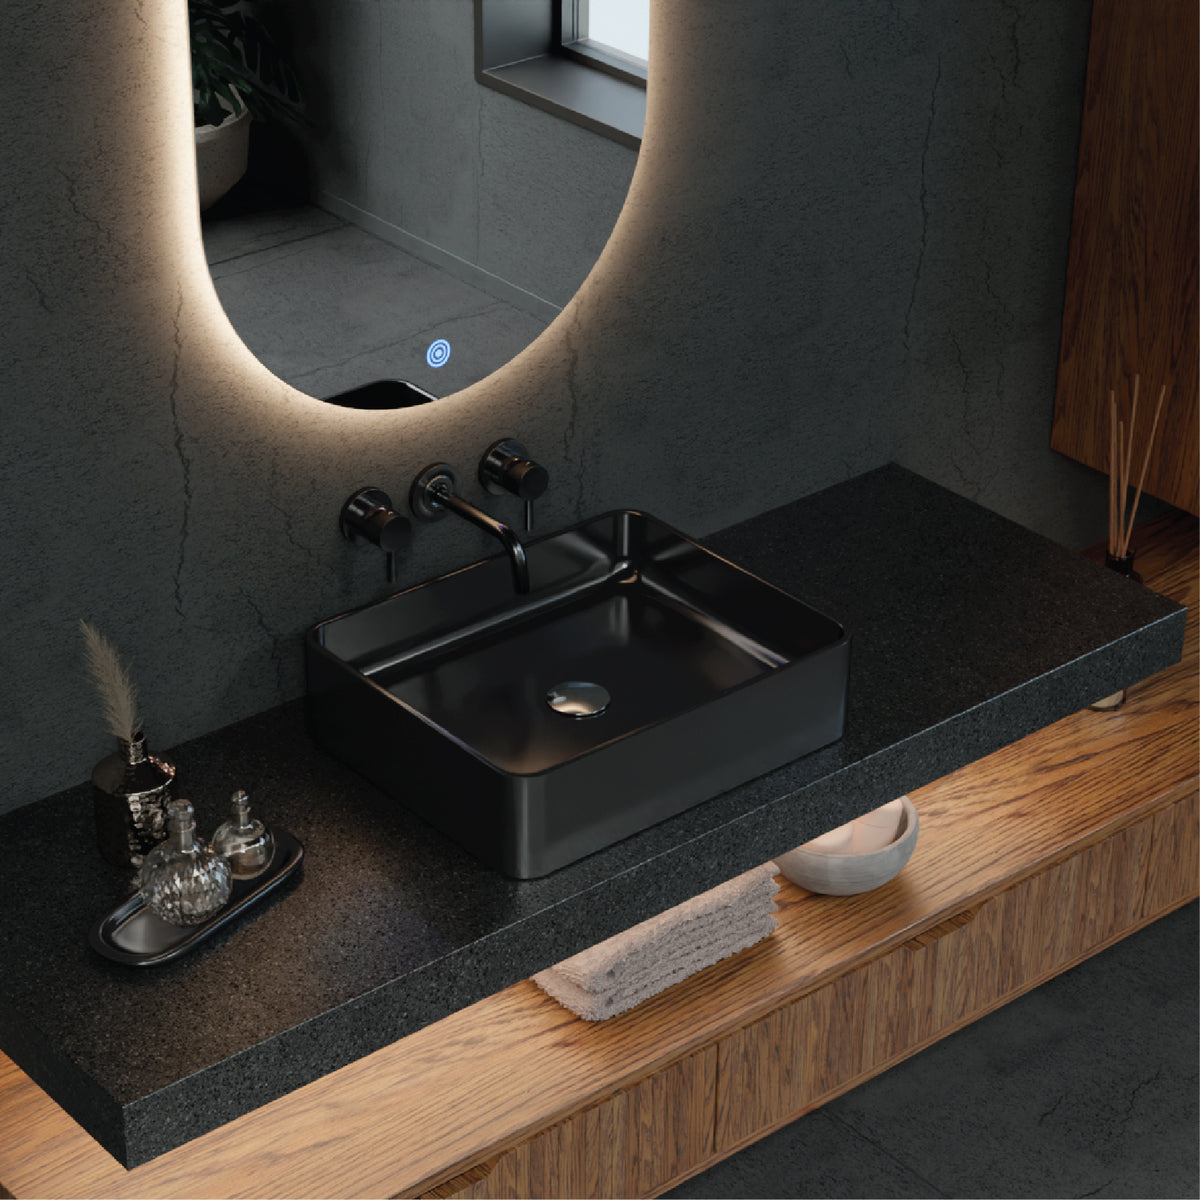 Make a bold statement with the Titan LED Mirror's sleek design, promising to enhance the overall aesthetic of your bathroom.